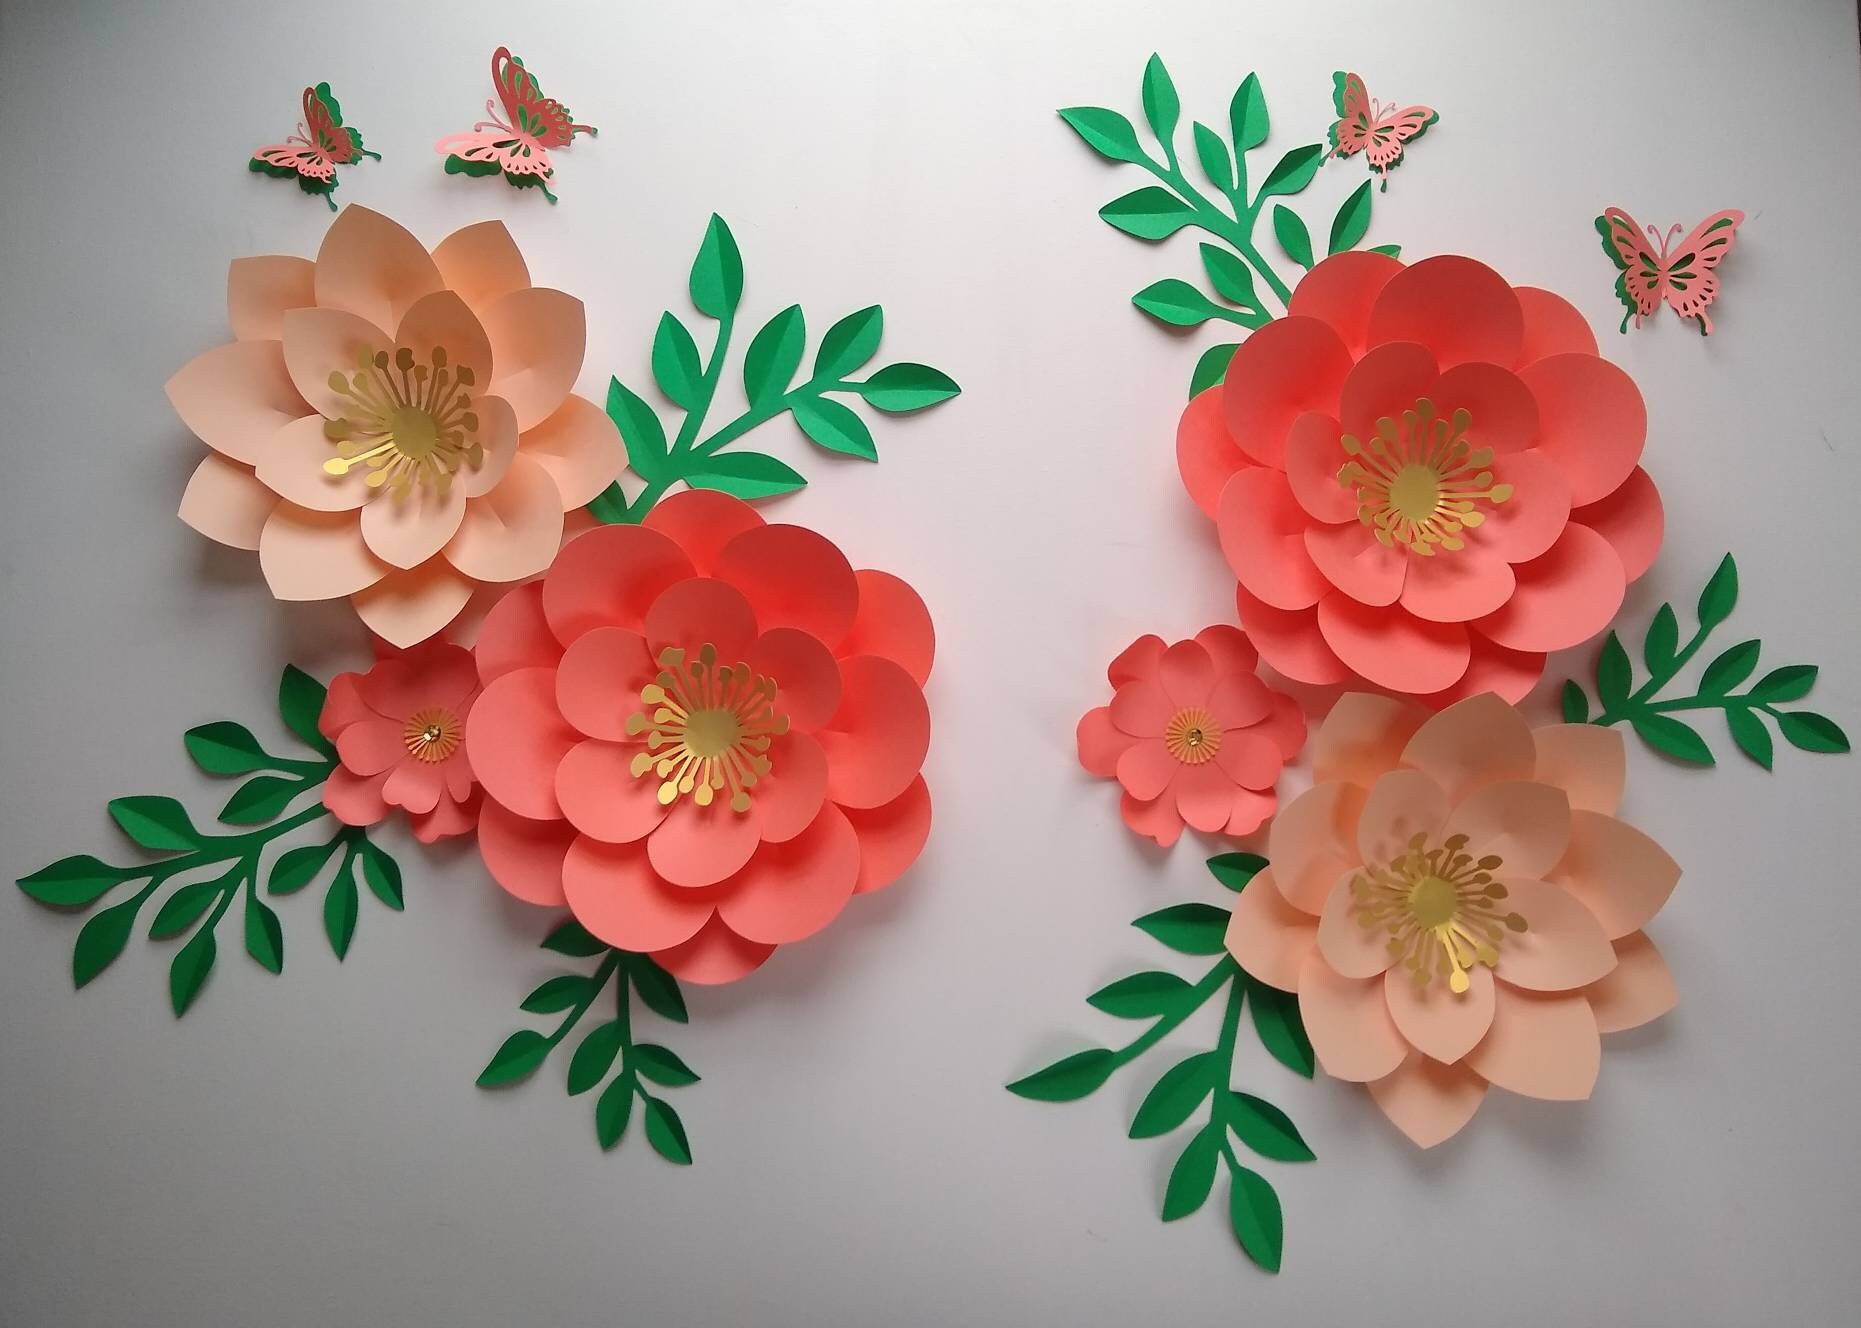  Paper Flowers Fall Backdrops - Includes 5 Paper Flowers 14 Paper  Leaves - Fully Assembled : Home & Kitchen